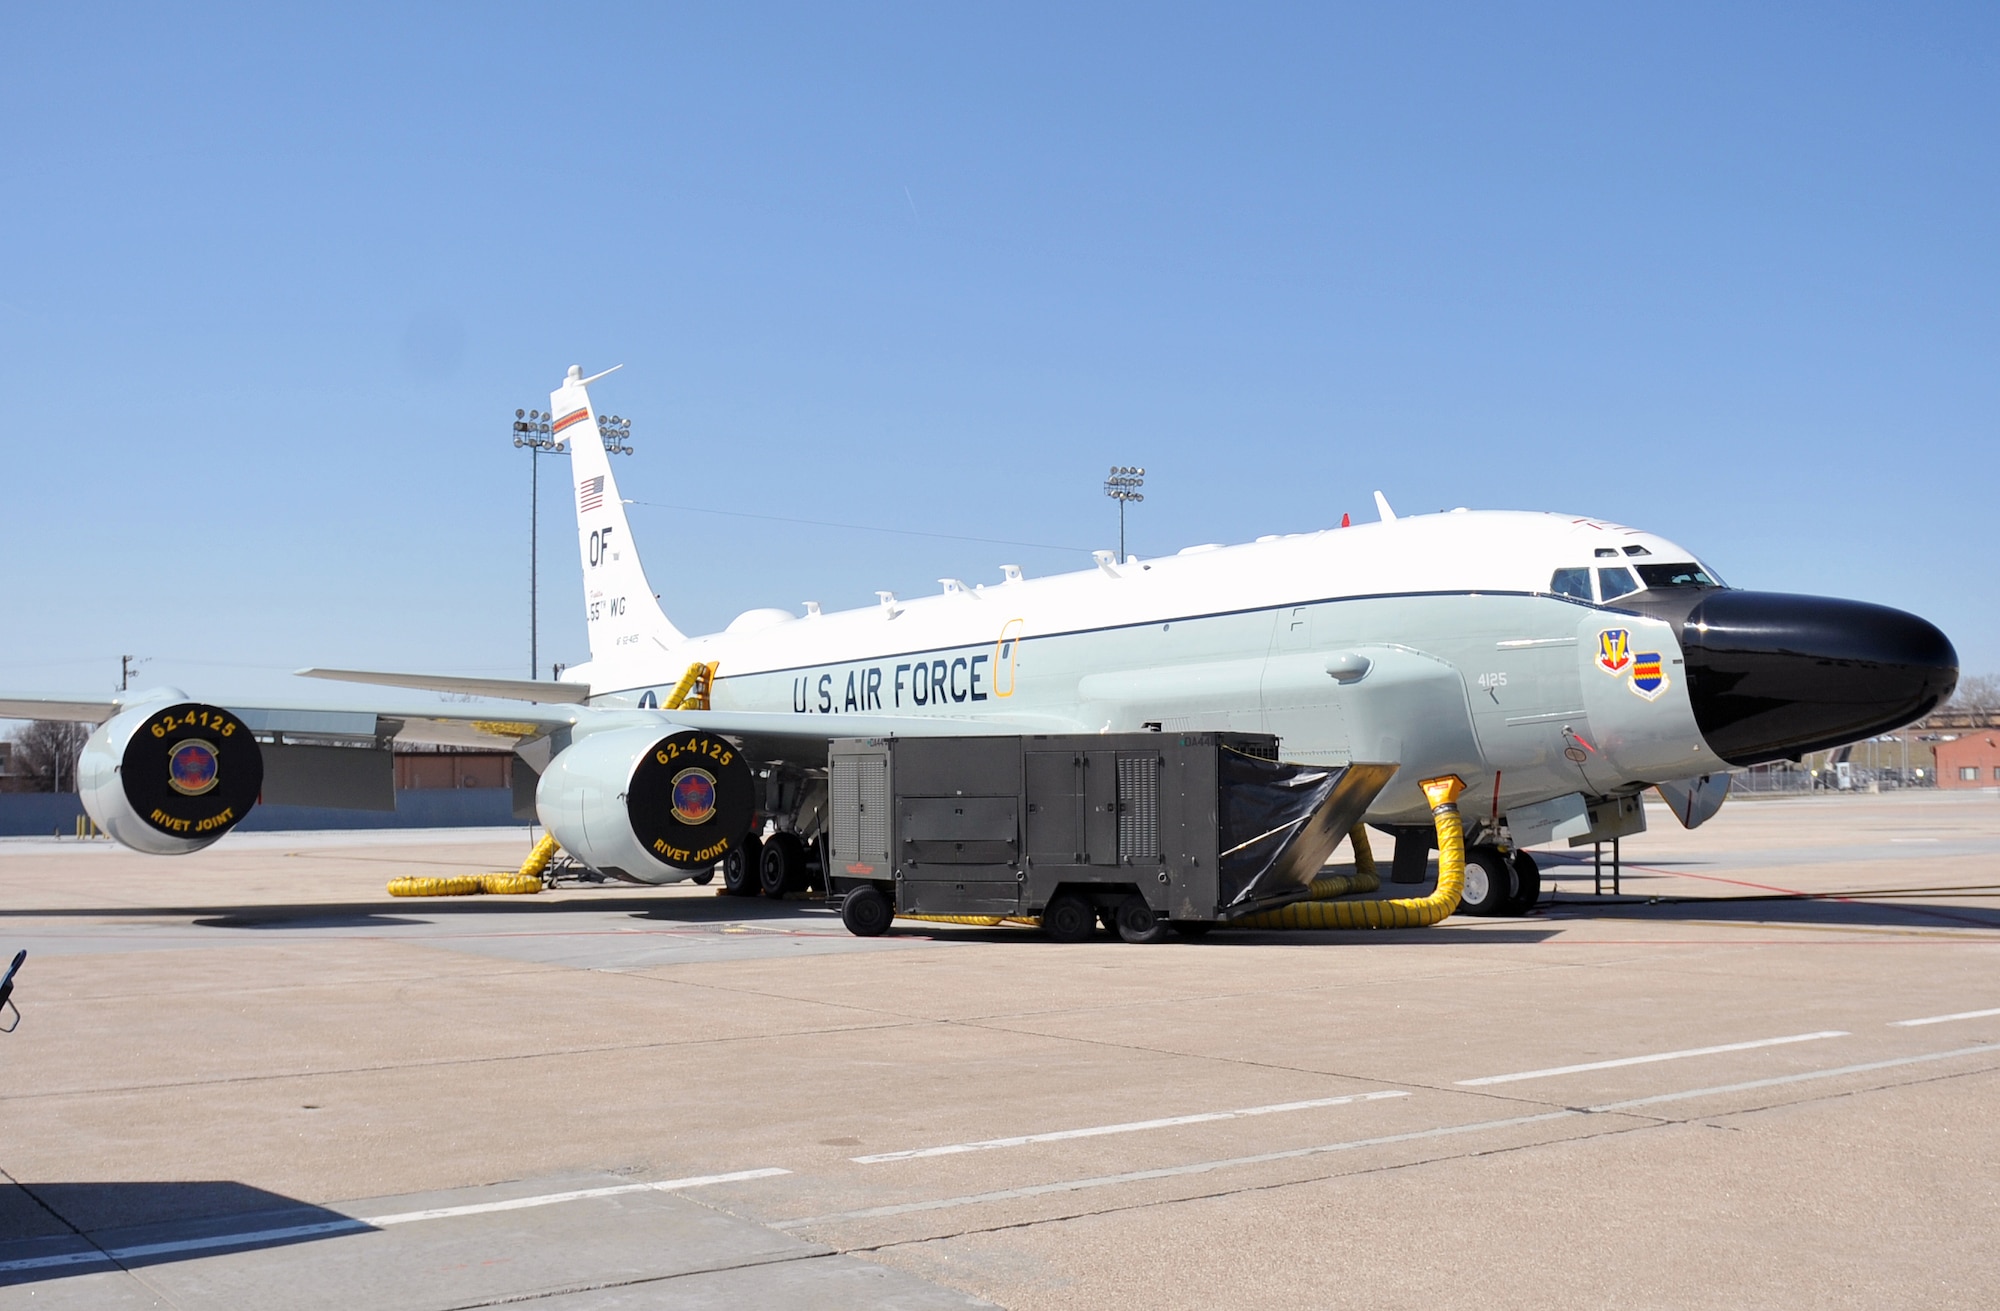 An RC-135V/W Rivet Joint sits on display outside the Bennie Davis Maintenance Facility as the new flagship aircraft of the 55th Wing at Offutt Air Force Base, Neb., March 16. The jet recently returned from being upgraded and was freshly painted with the new wing designator. The flagship aircraft stands as a symbol for every member of the 55th WG. (Photo by Jeff Gates/Released)